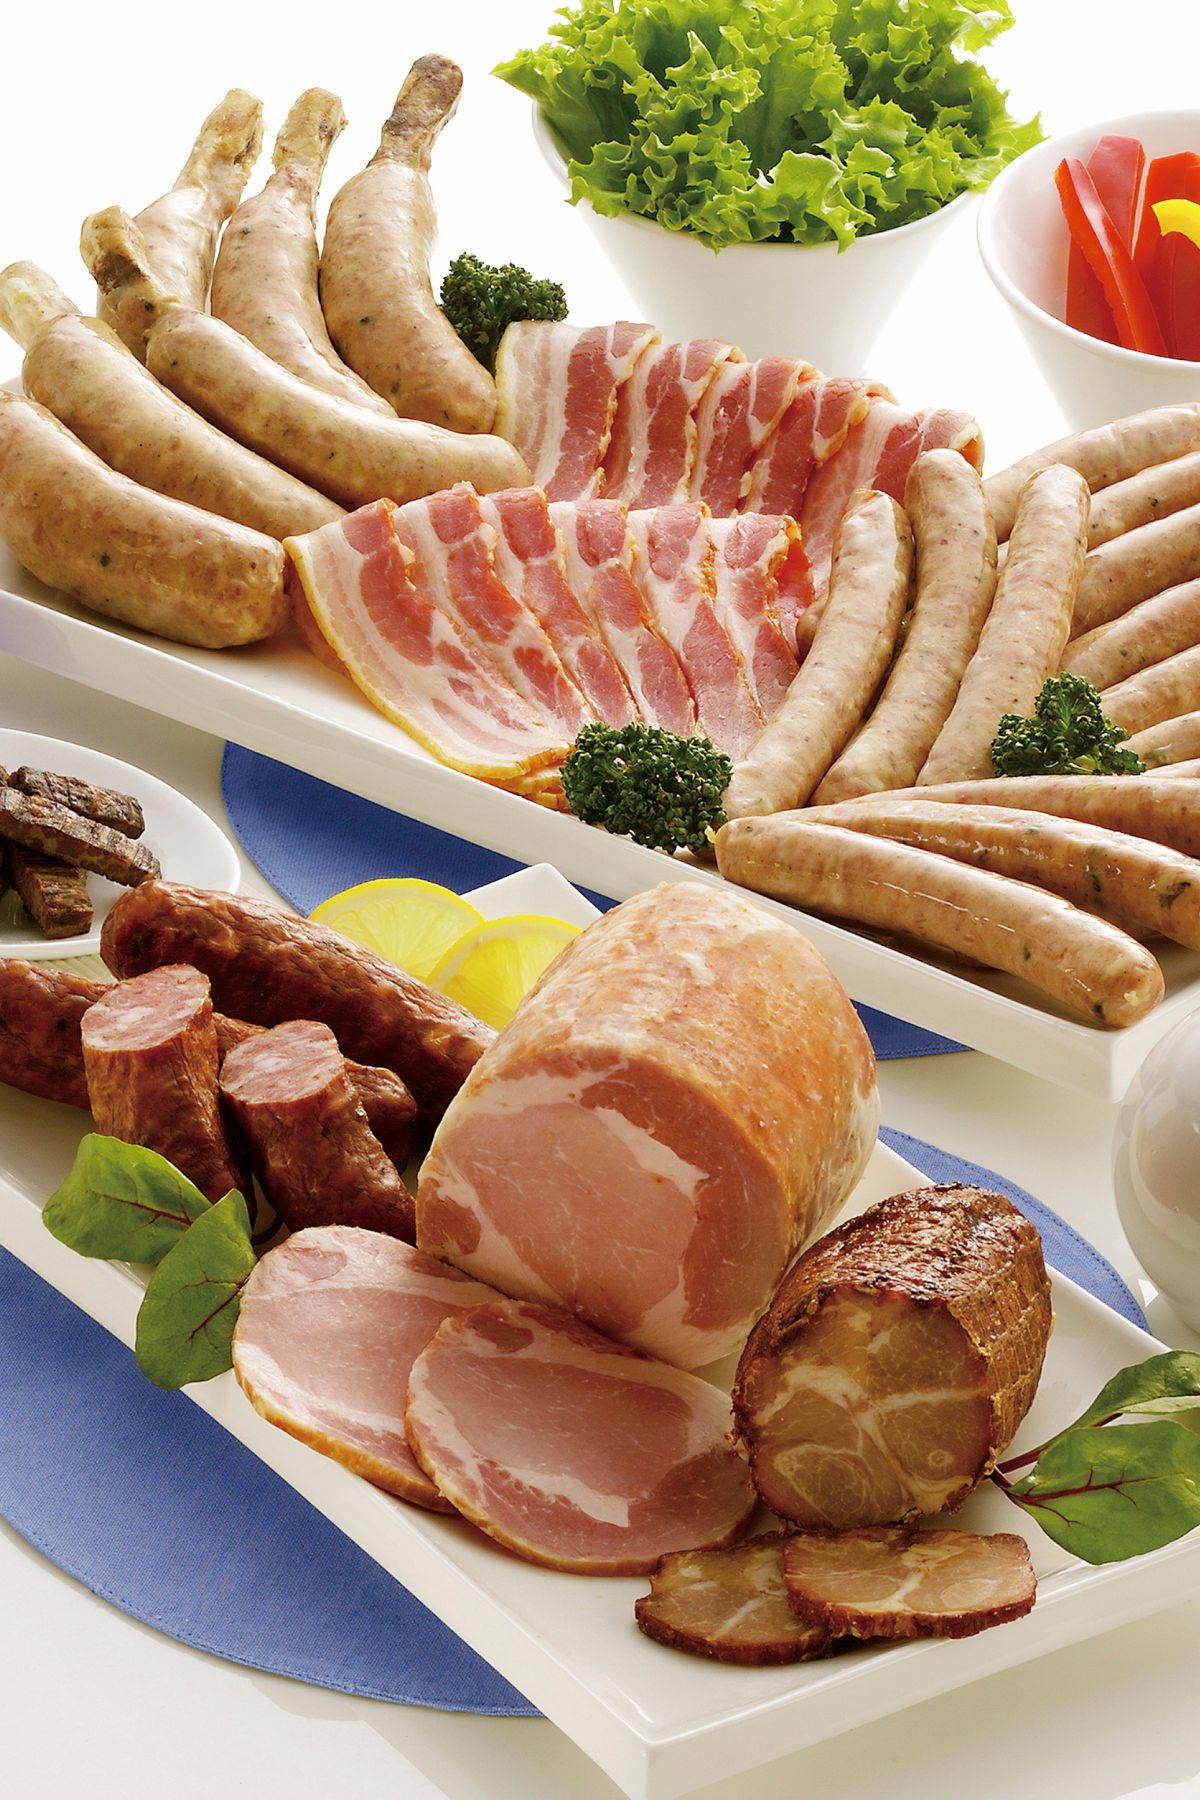 a variety of processed meats on a table.